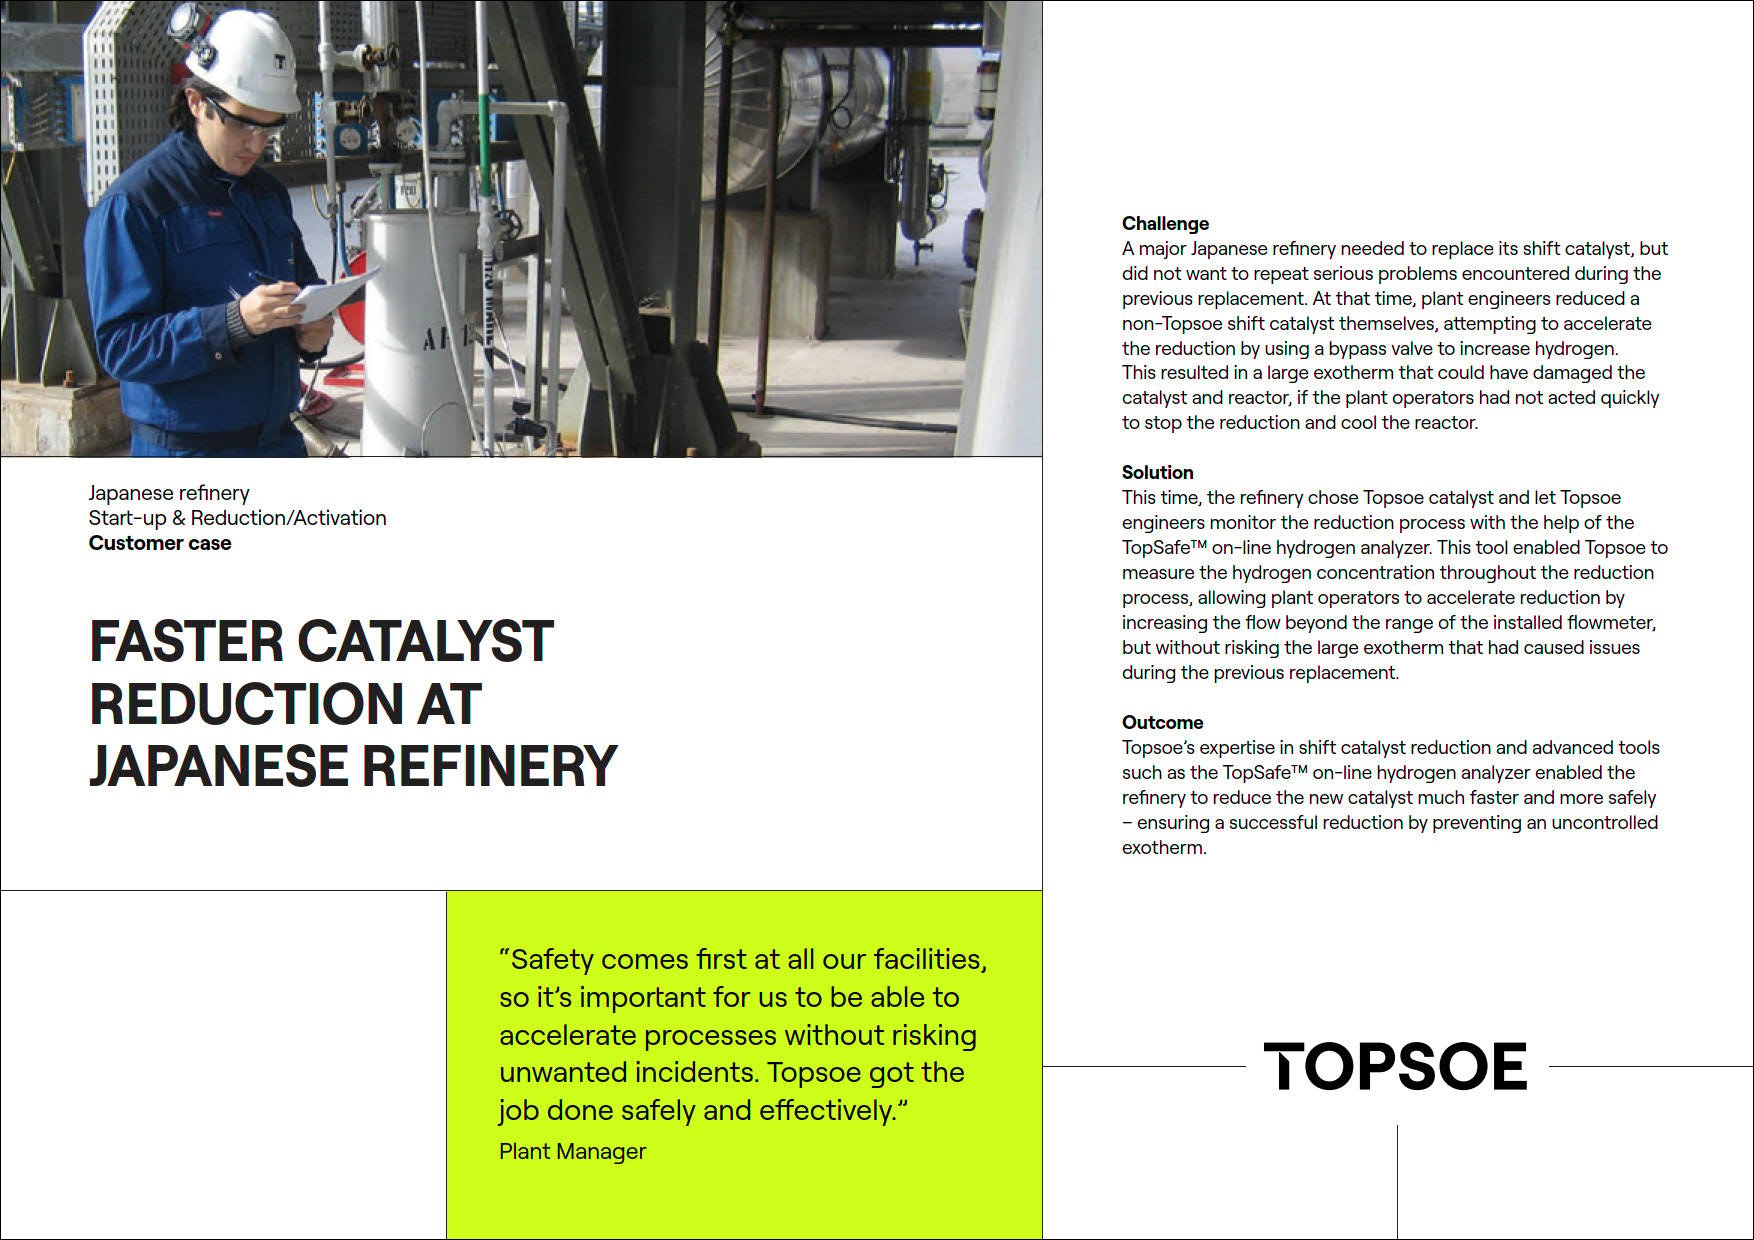 Faster catalyst reduction at Japanese refinery